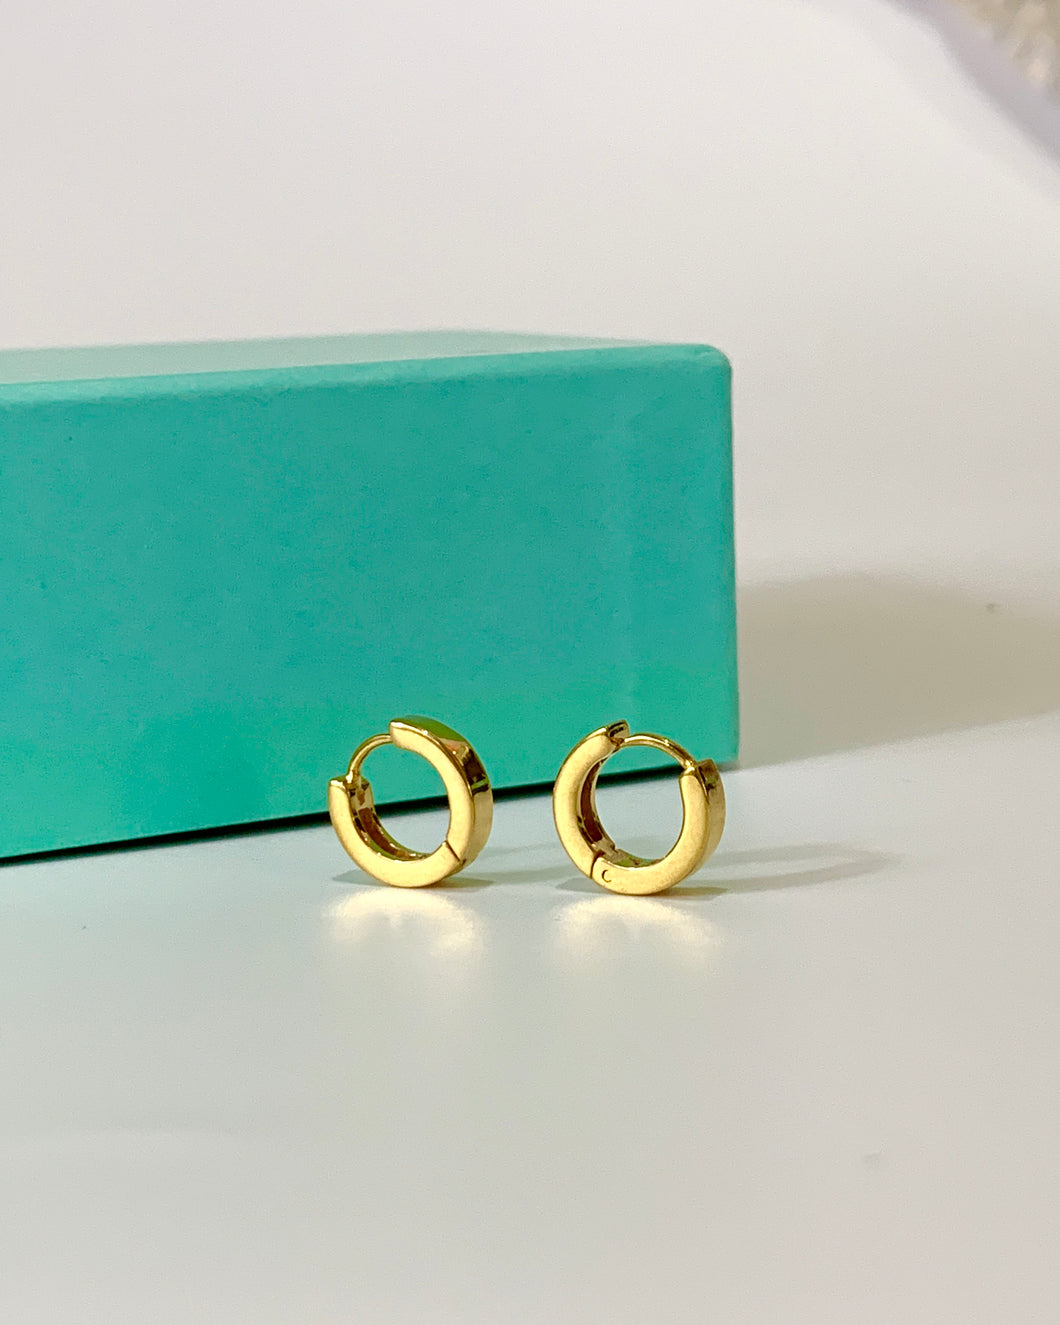 These 14k gold chunky huggie hoop earrings come beautifully presented in our signature branded gift box packaging.